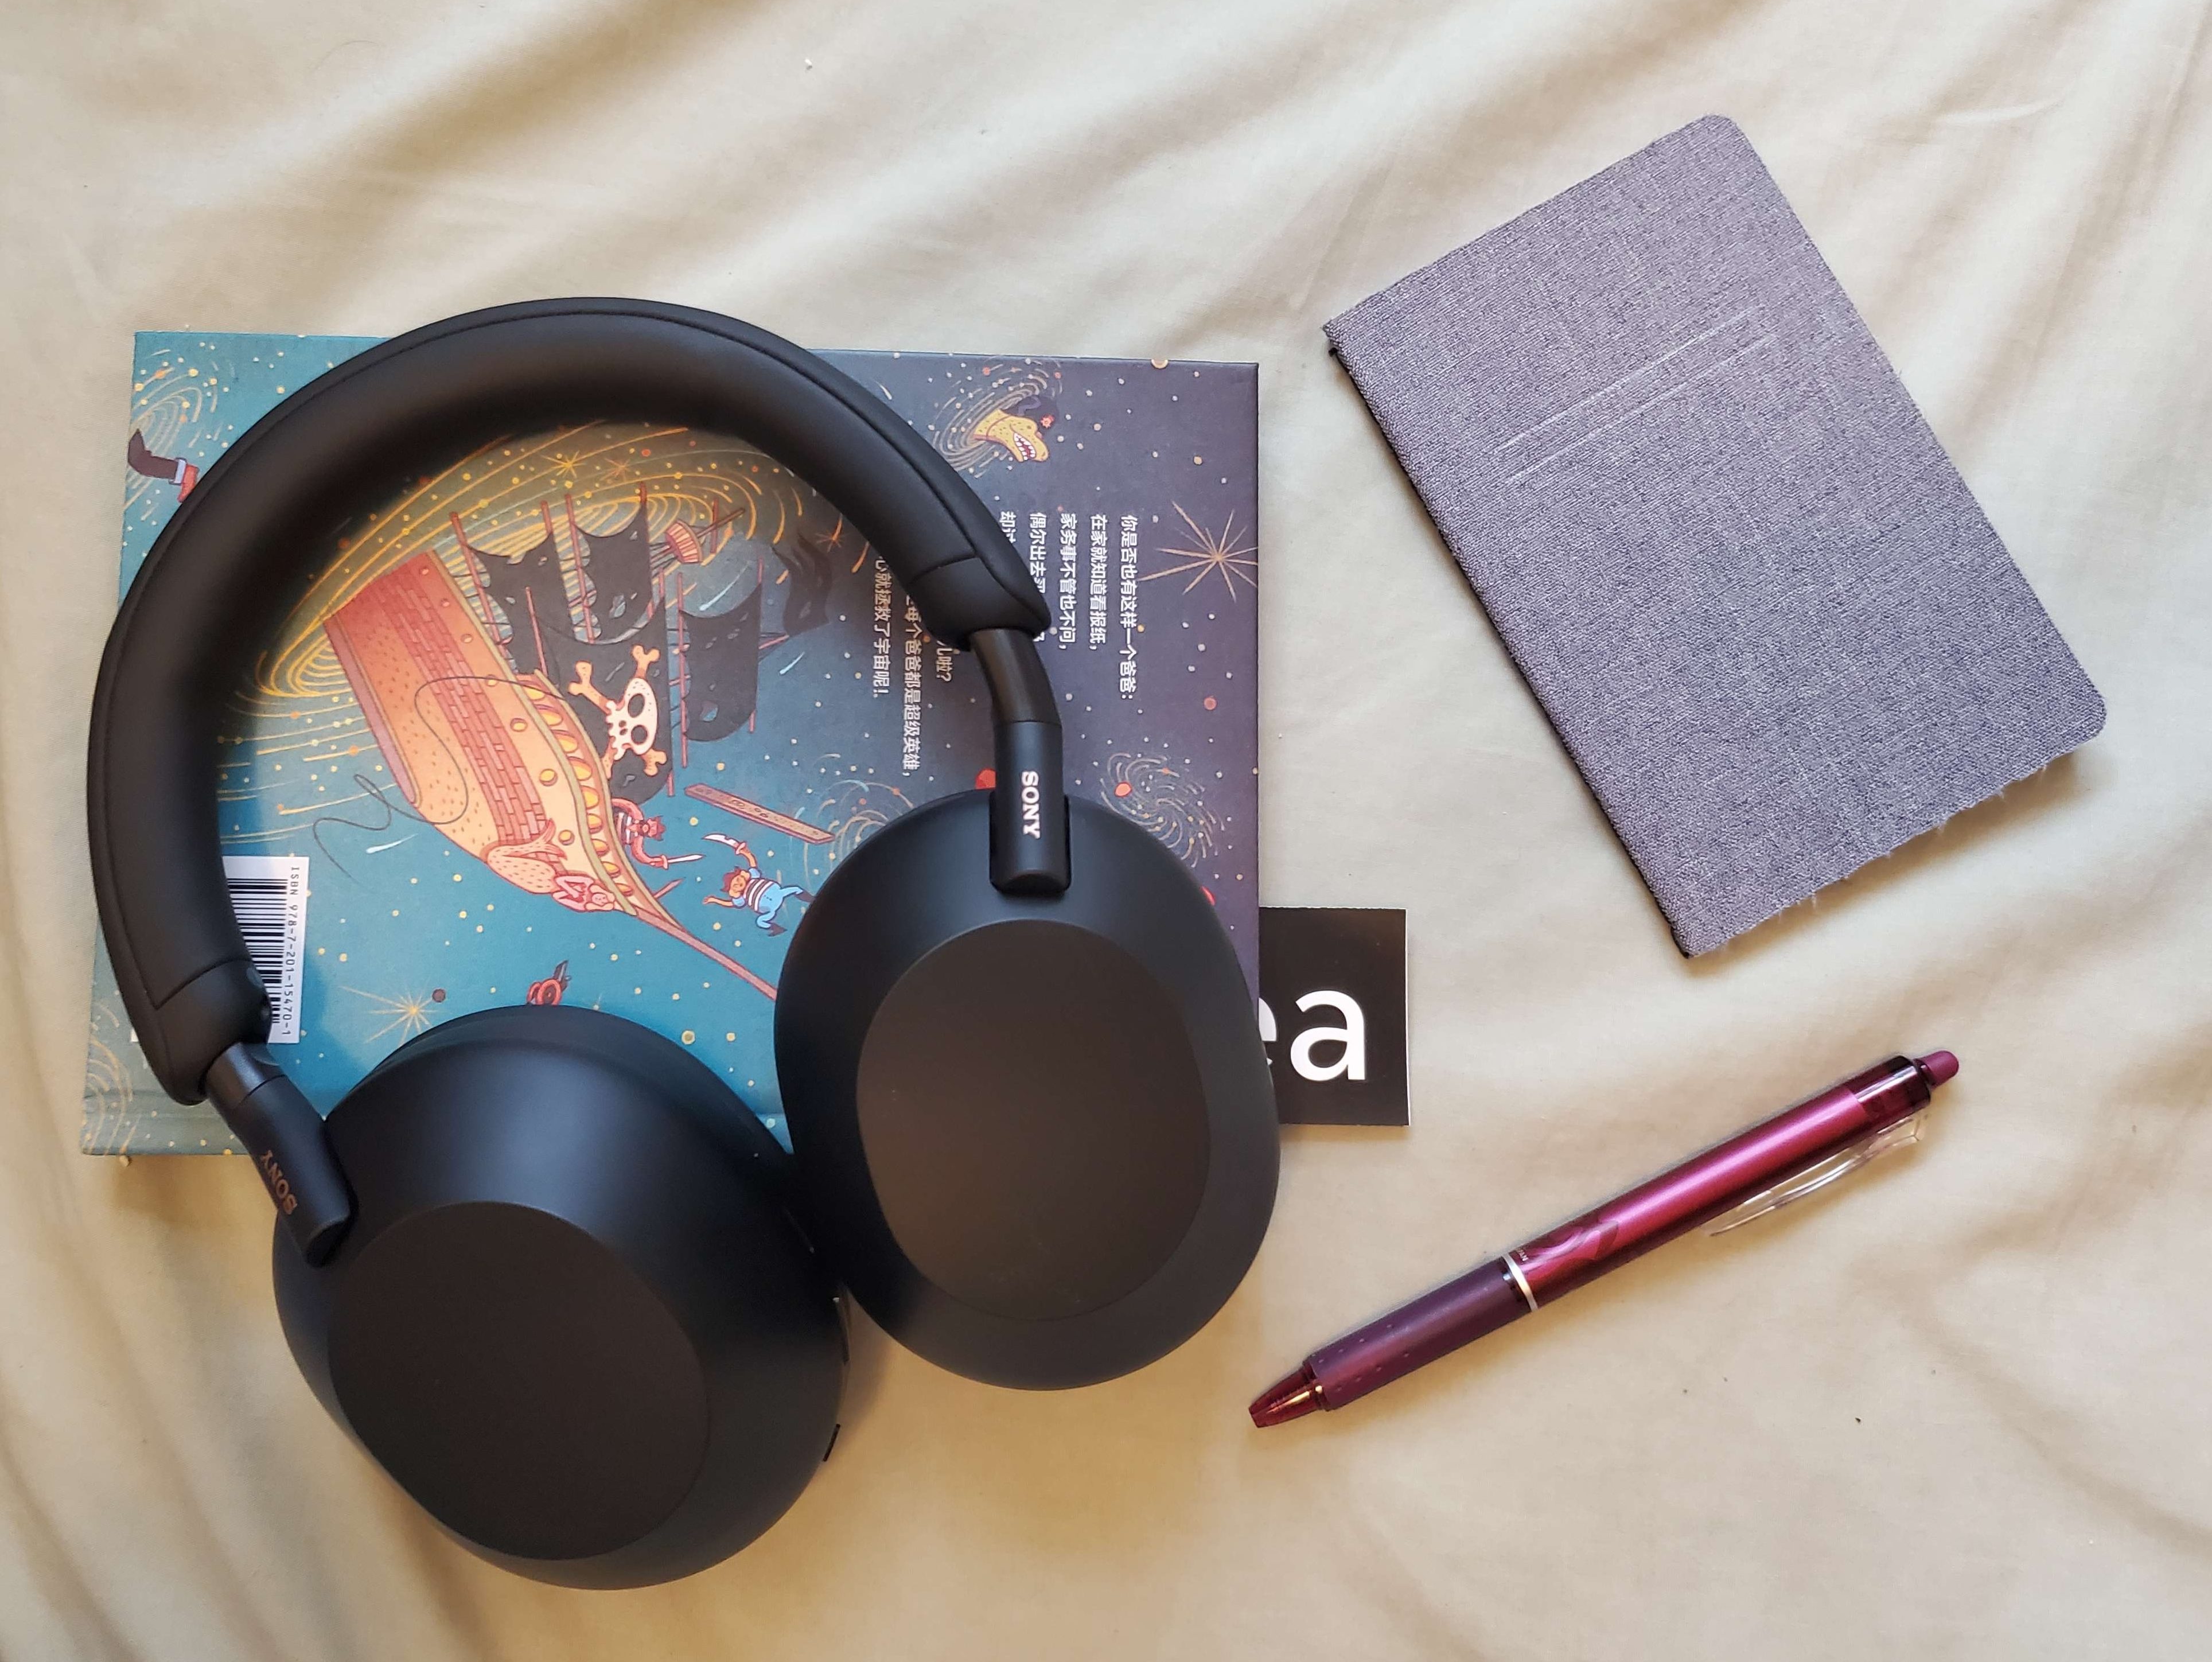 The Sony WH-1000-XM5 on top of a book for study, next to a notebook and pen.